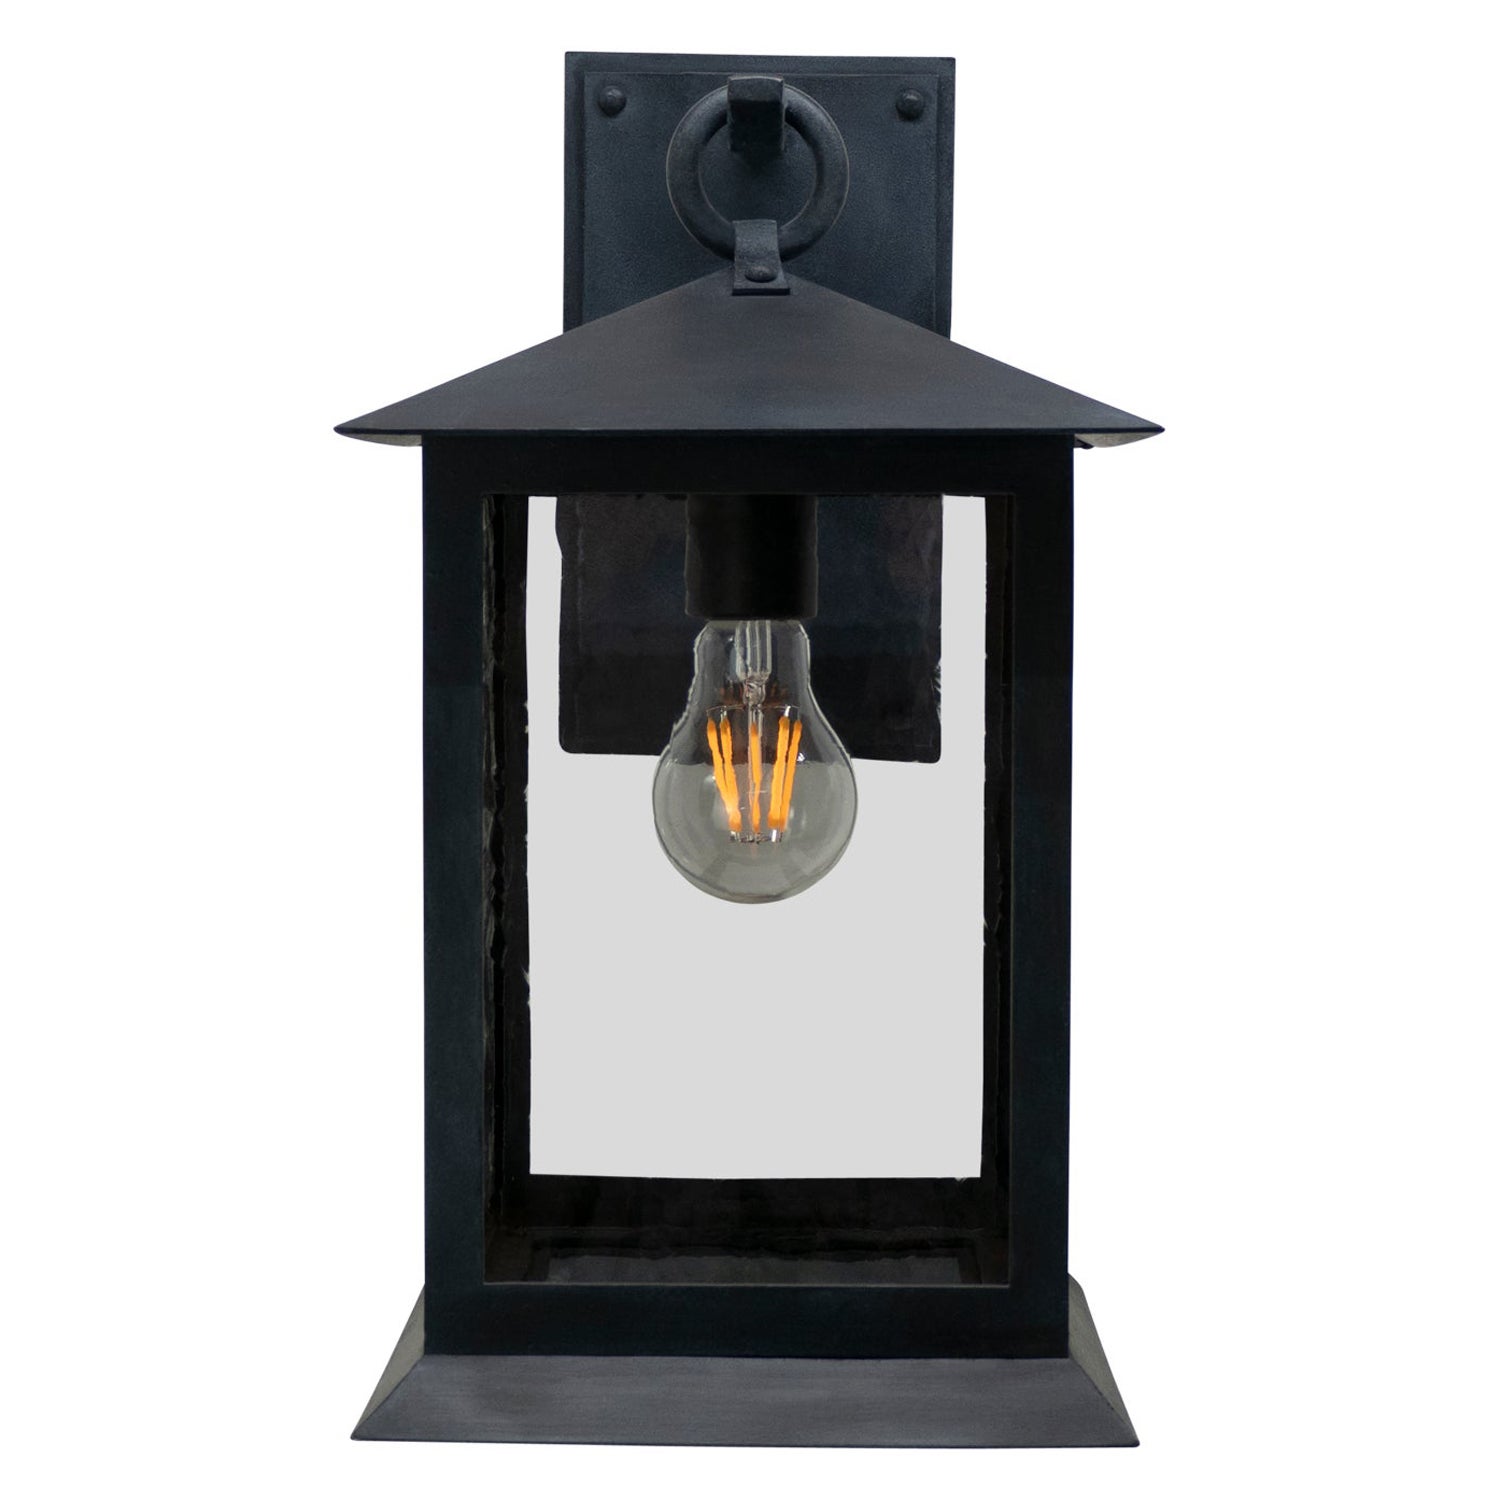 Traditional Contemporary Minimal Style Wrought Iron Wall Sconce Light Fixture For Sale